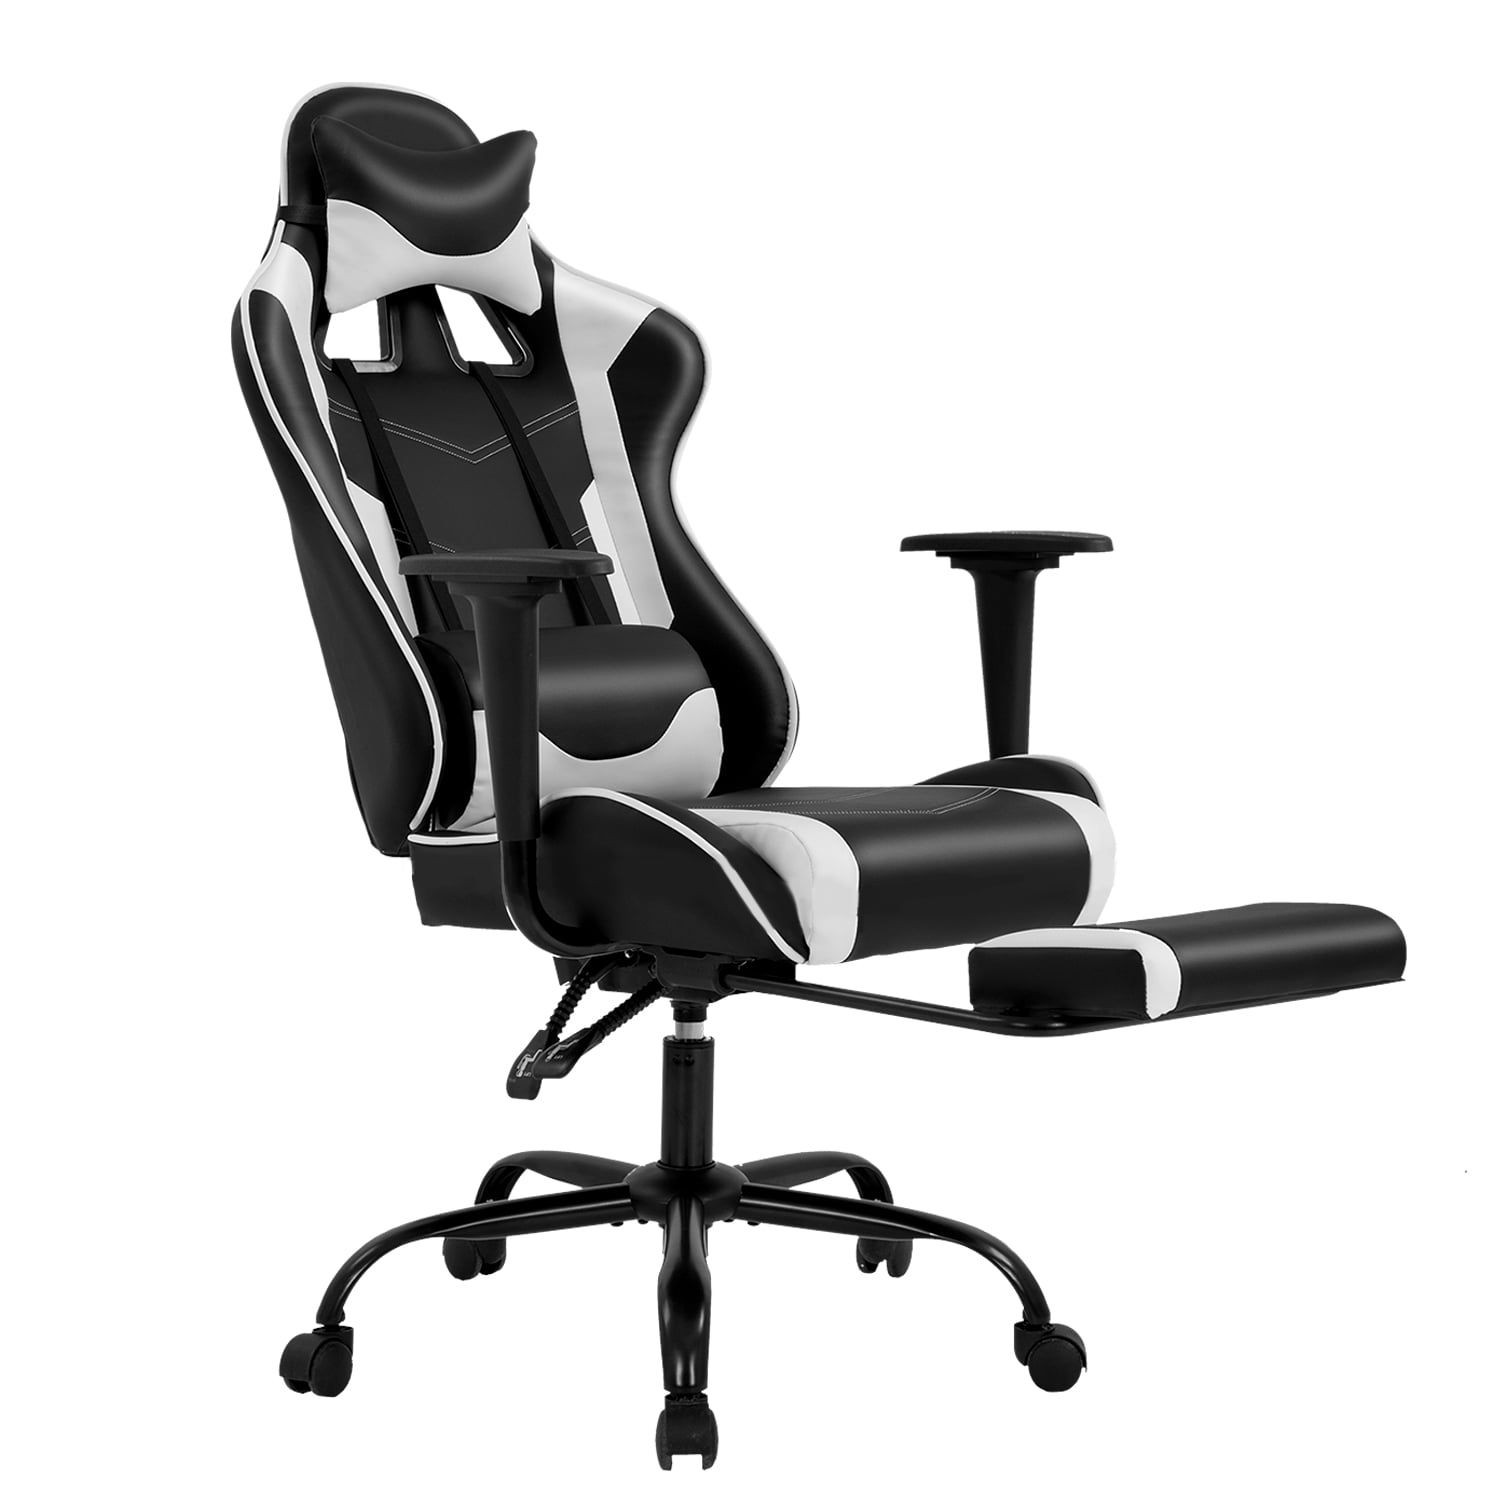 Ergonomic Computer Gaming Chair High-back Chair Swivel Racing PC Chair Footrest 